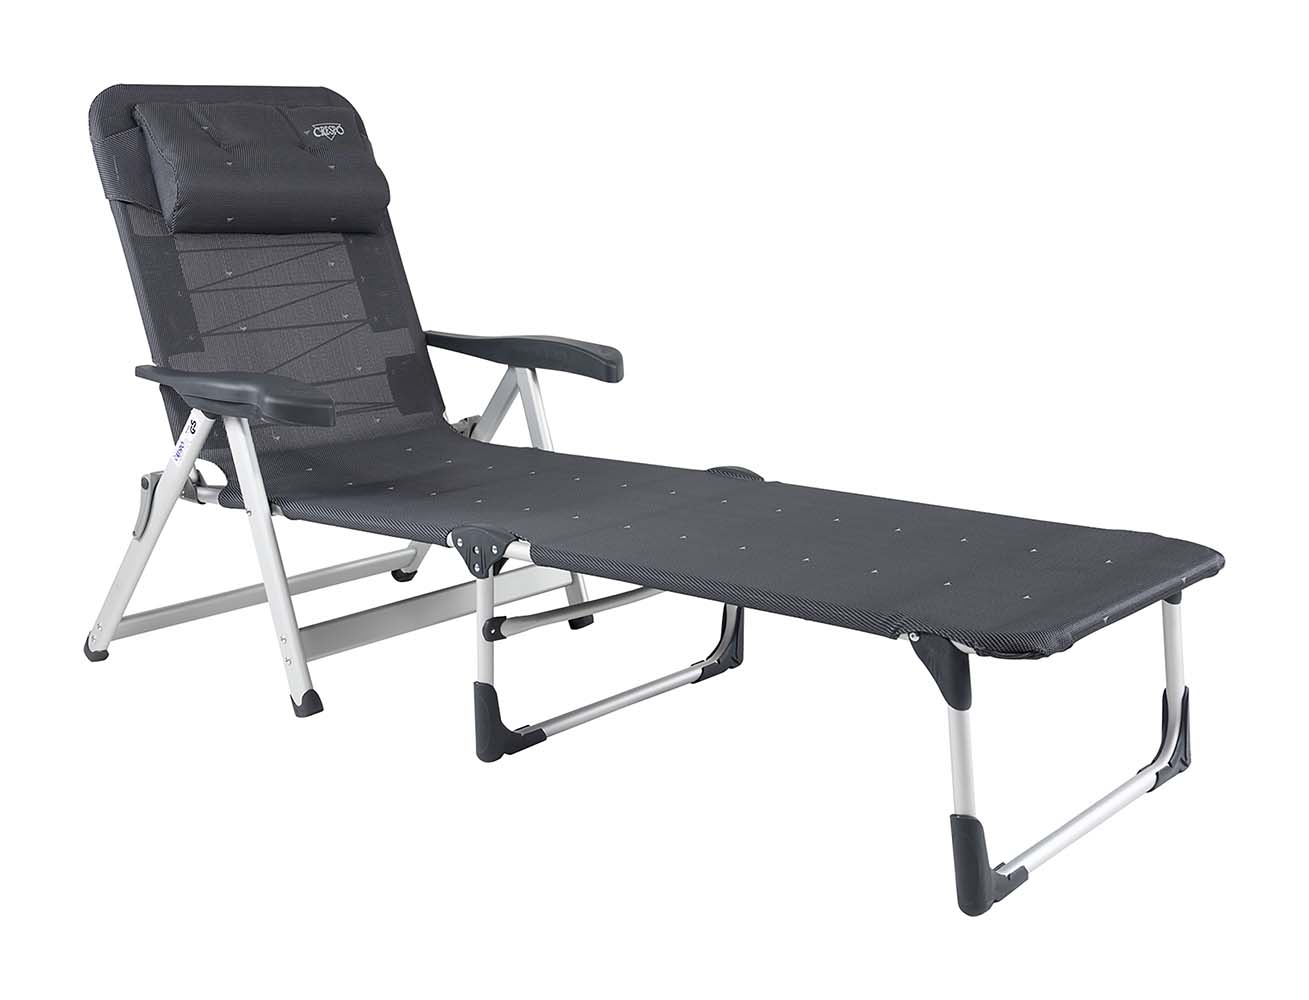 1148350 Very comfortable chair and lounger. Anodised aluminium H-shaped frame manufactured from oval tubes for extra stability and sturdiness. Backrest adjustable in seven positions. Ideal for use at the camp site and in the garden. Dimensions: length 195cm, width 54cm and sitting/reclining height 29cm. Folded up: length 87cm, width 68cm and height 19cm. Weight: 5.3kg, maximum load-bearing capacity: 140kg. Colour: dark grey (40).